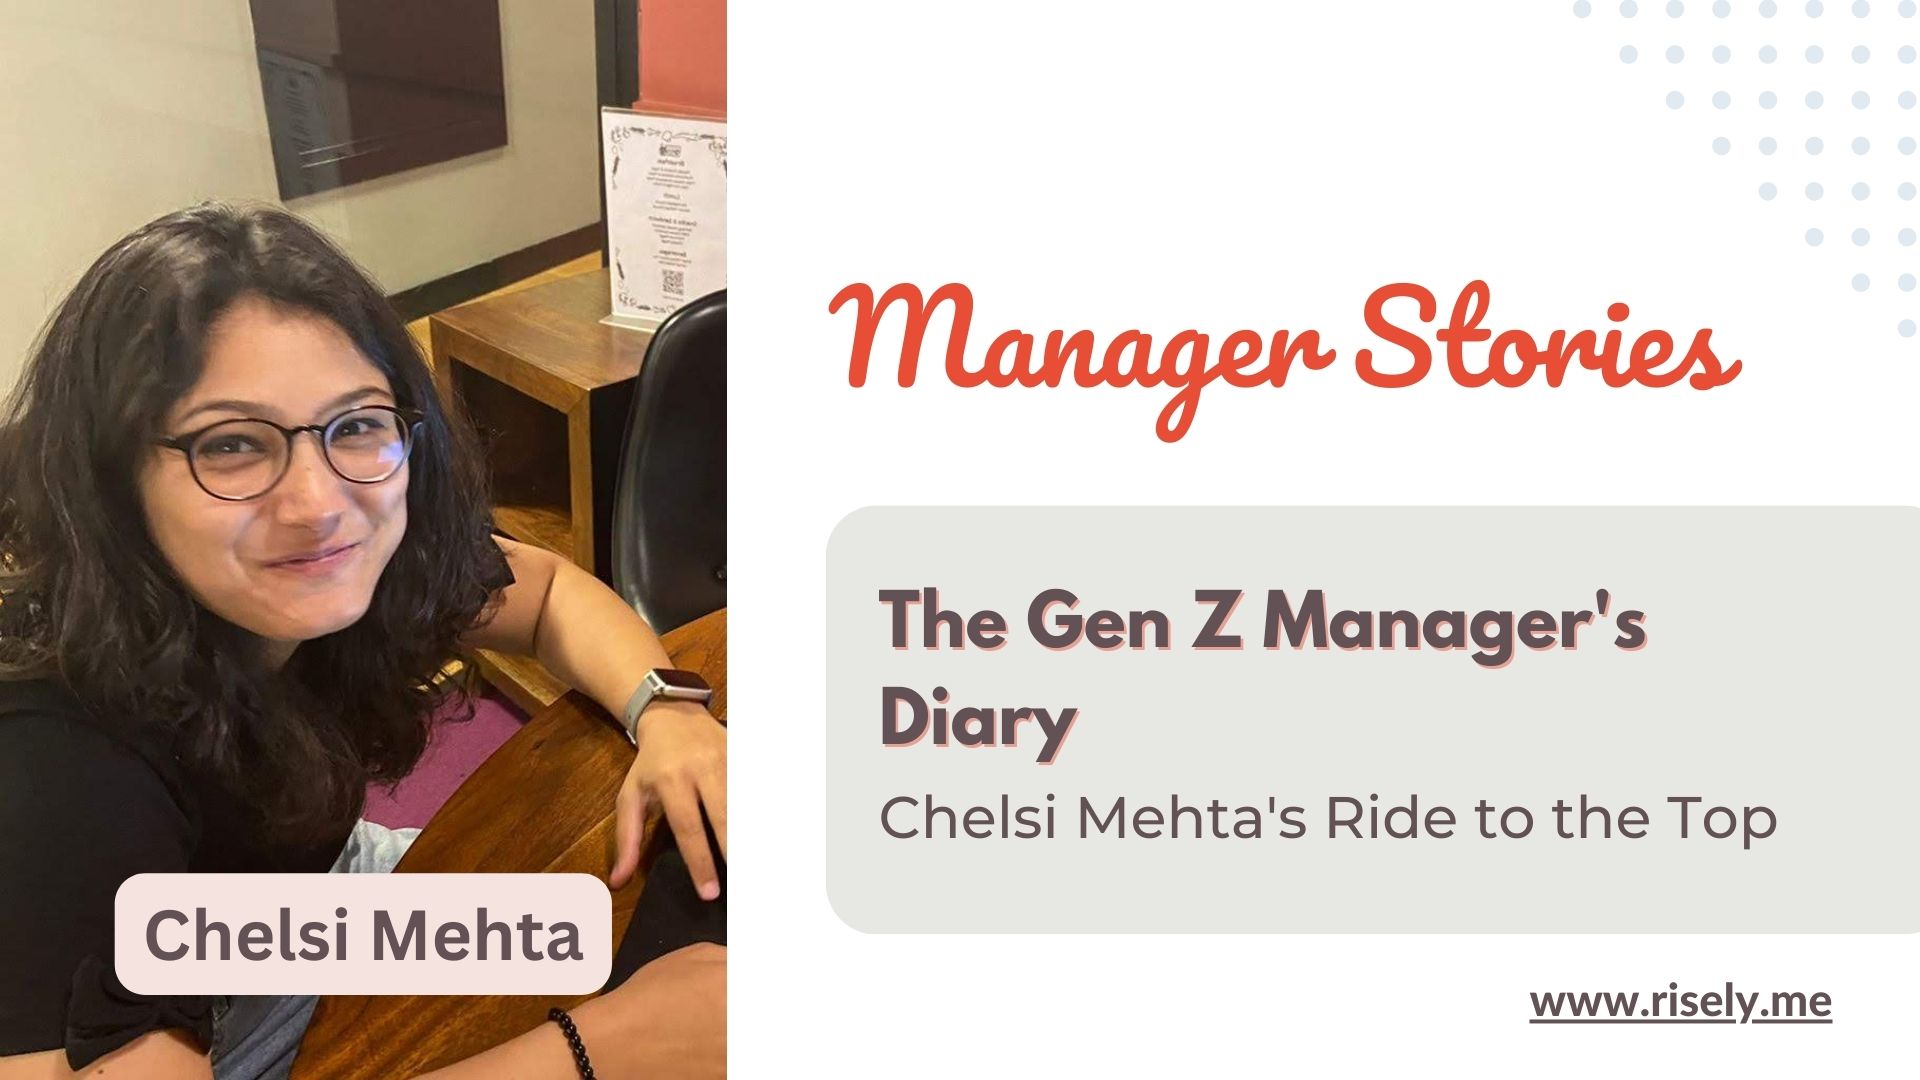 The Gen Z Manager's Diary: Chelsi Mehta's Ride to the Top